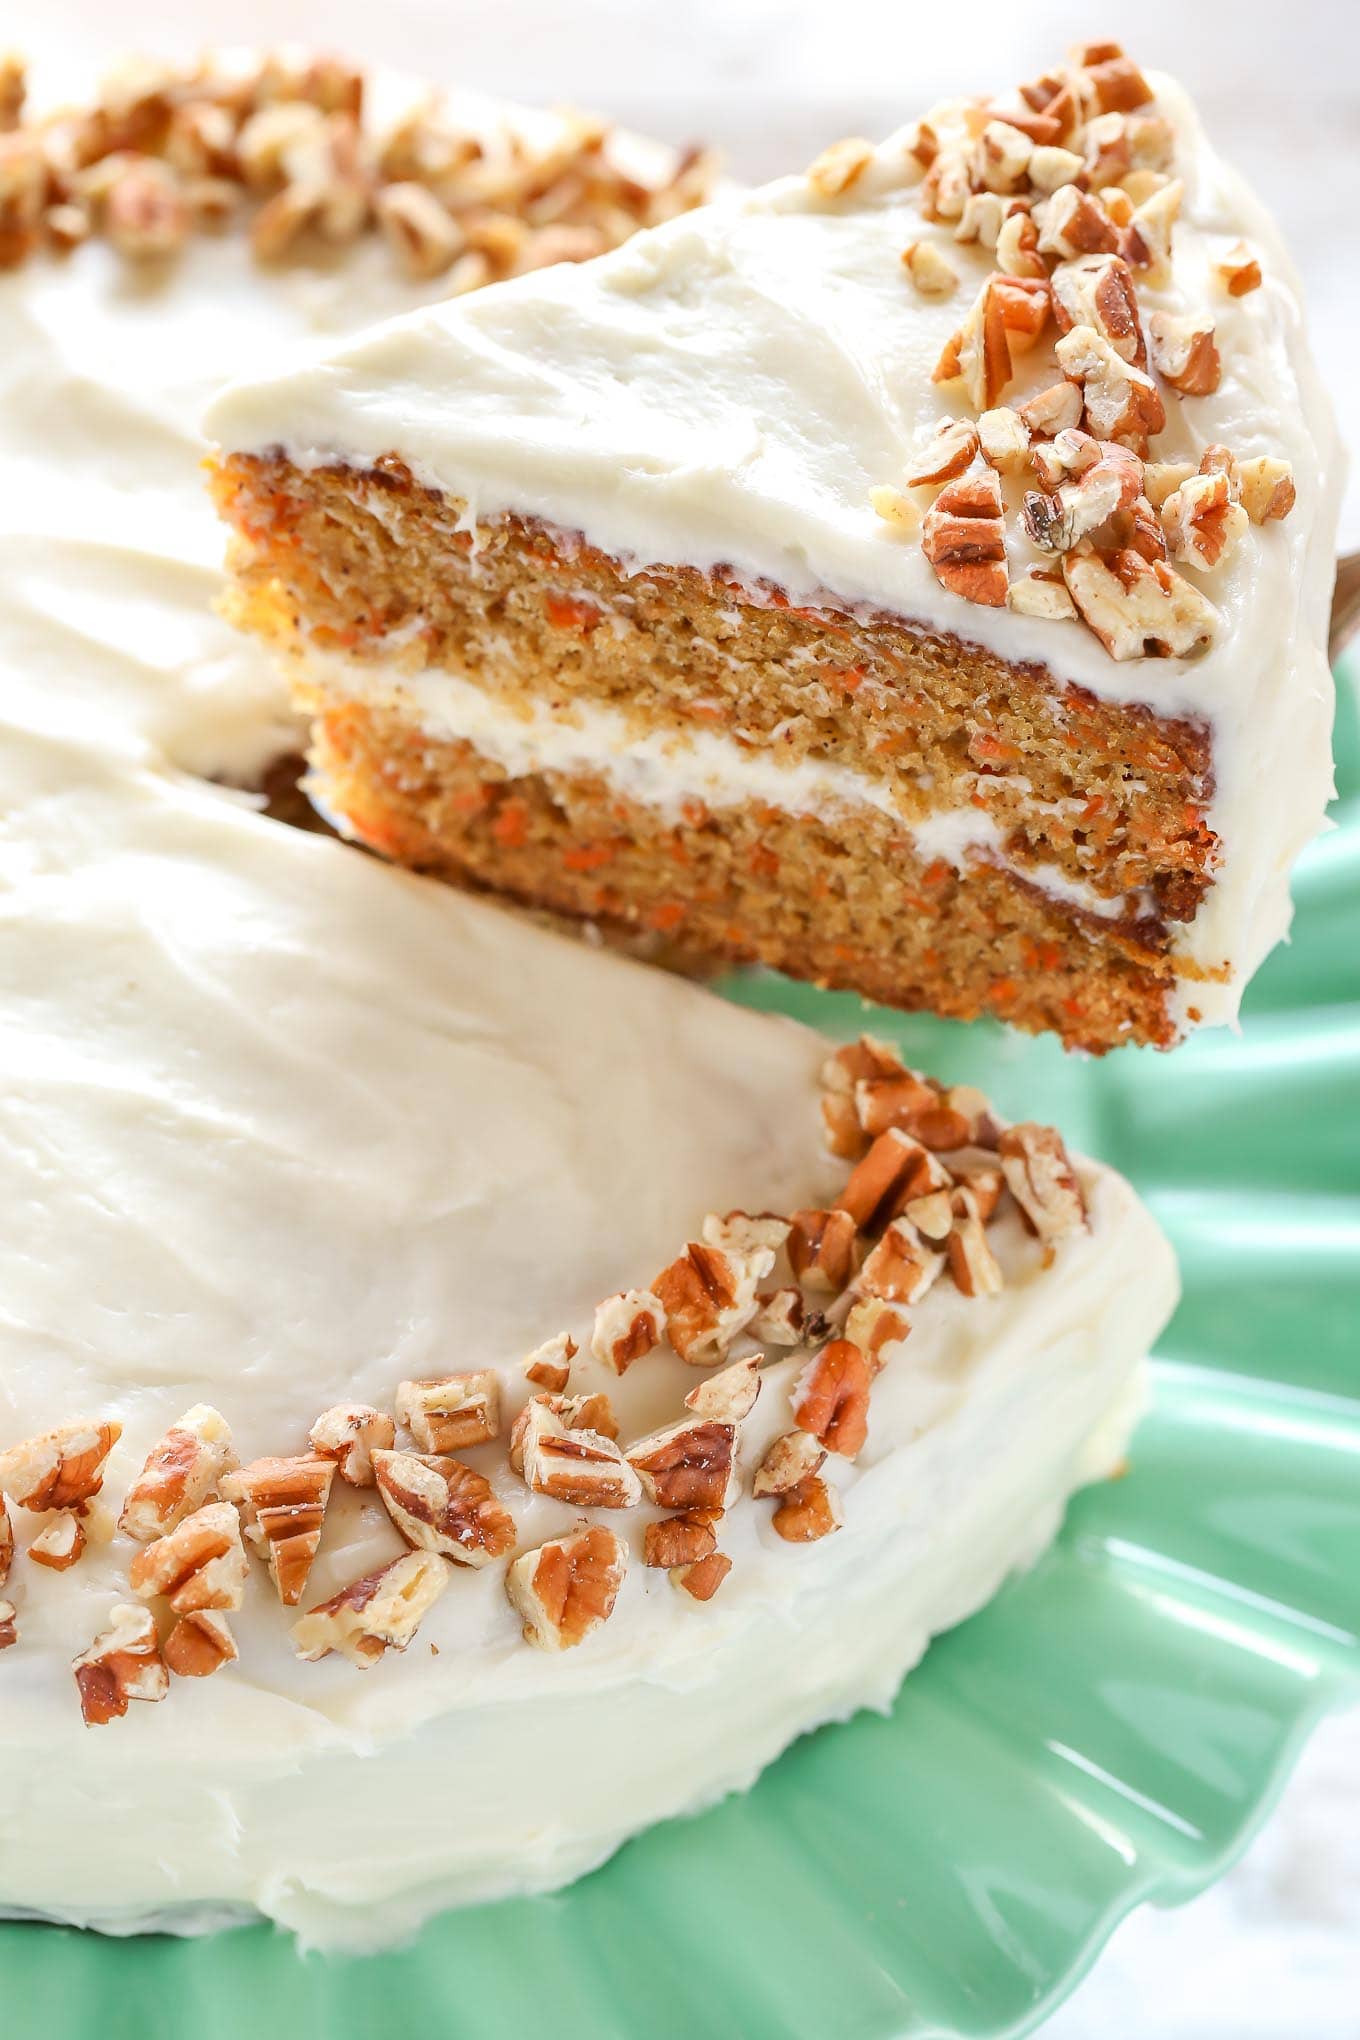 A slice of carrot cake being lifted up to show the texture.